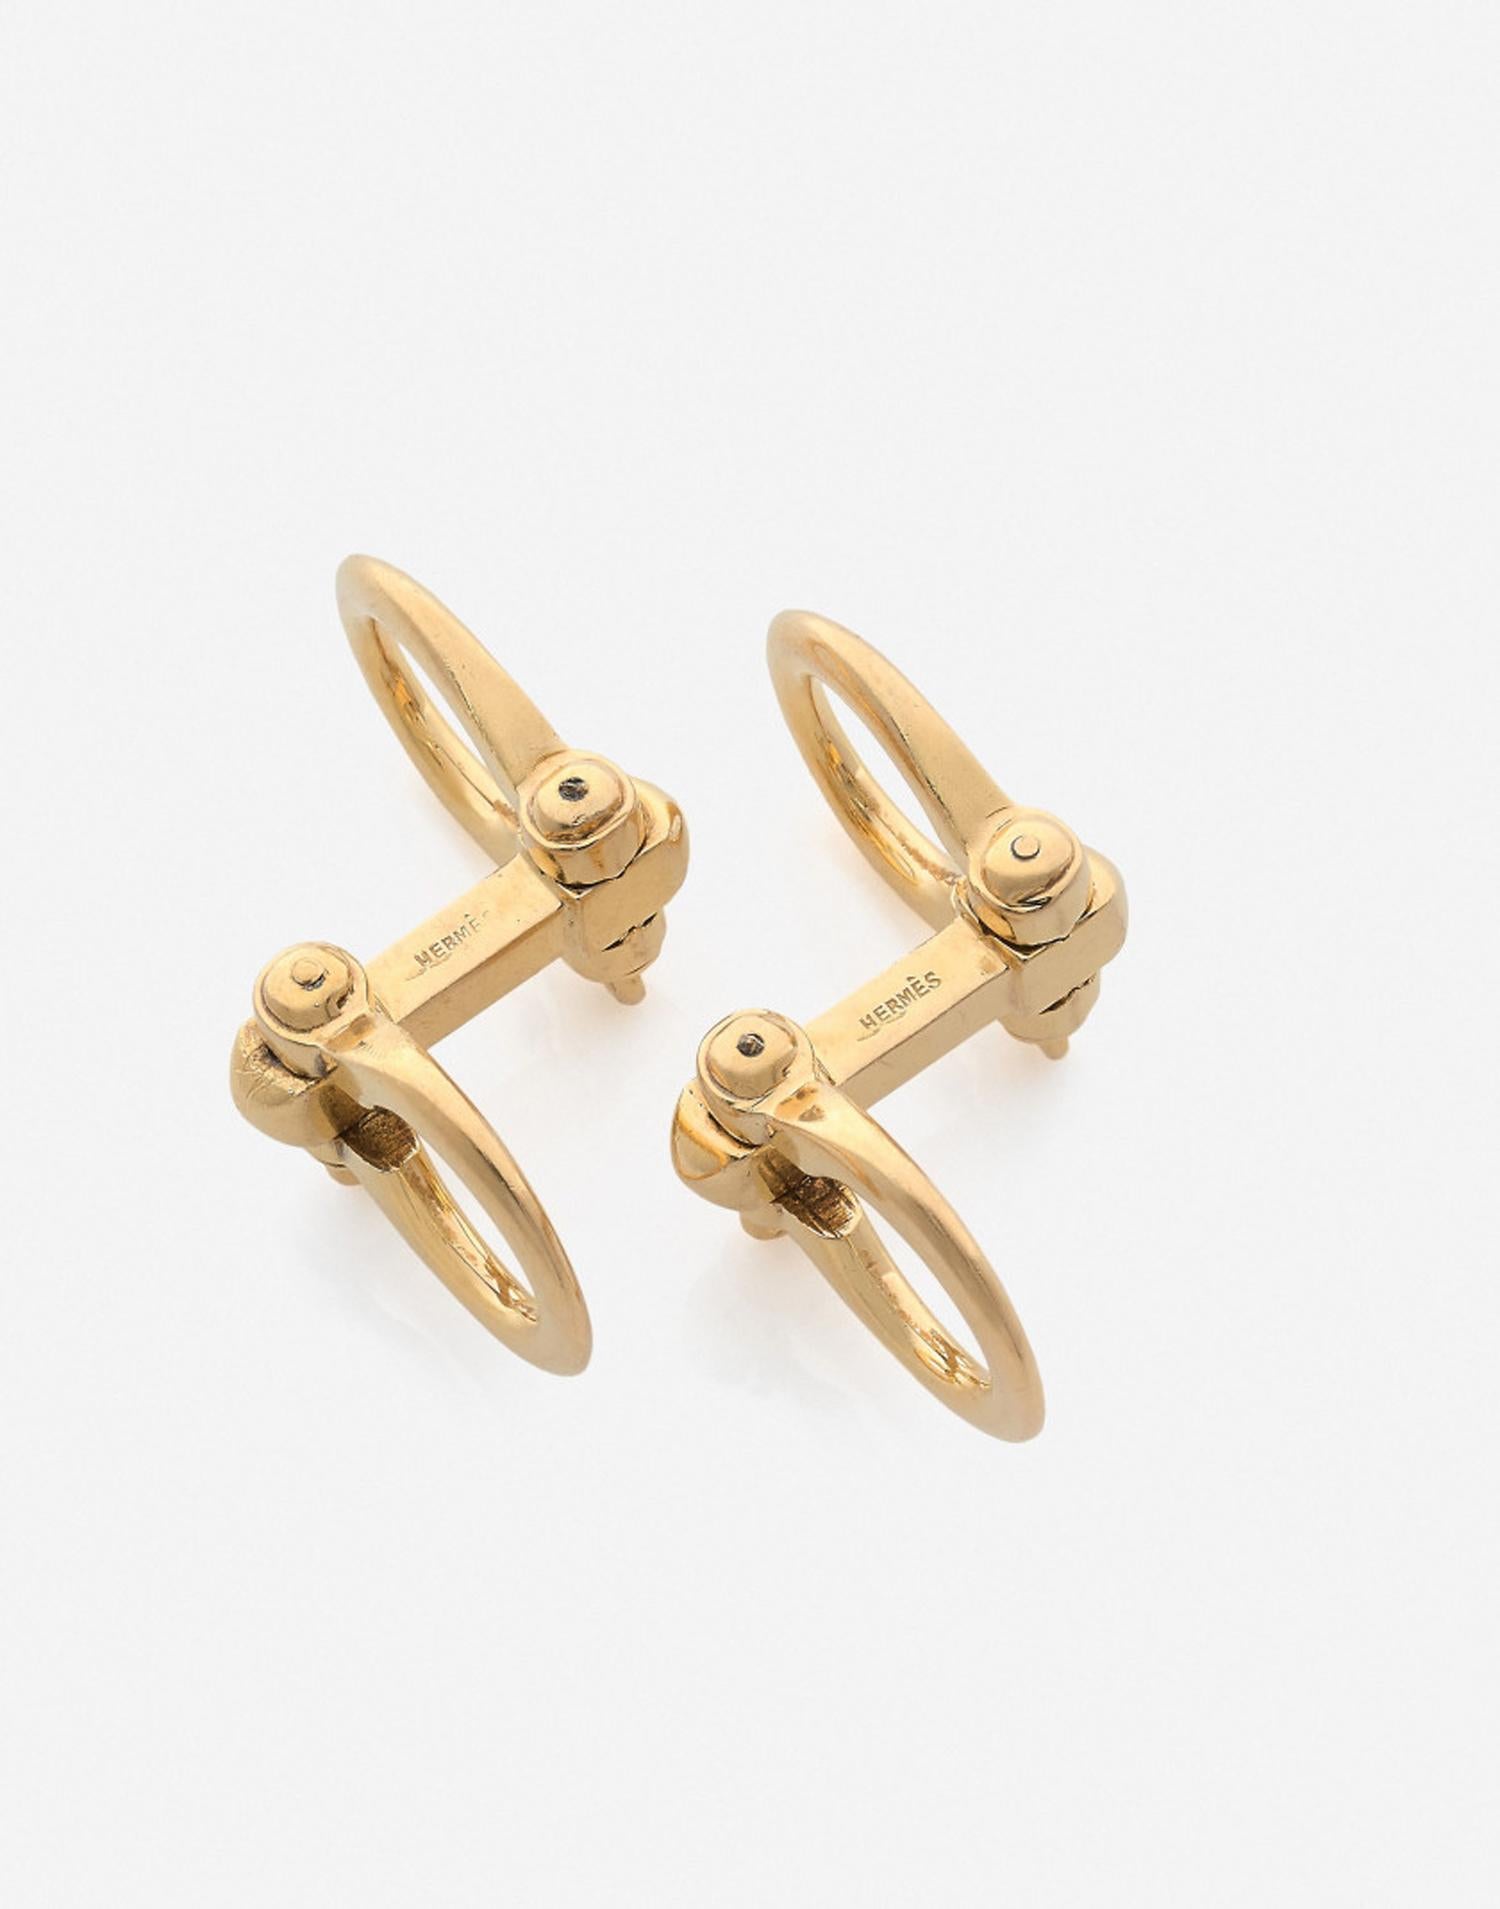 18K Yellow Gold Cufflinks, signed Hermés; Numbered 18399; French Assay Marks; Circa 1960